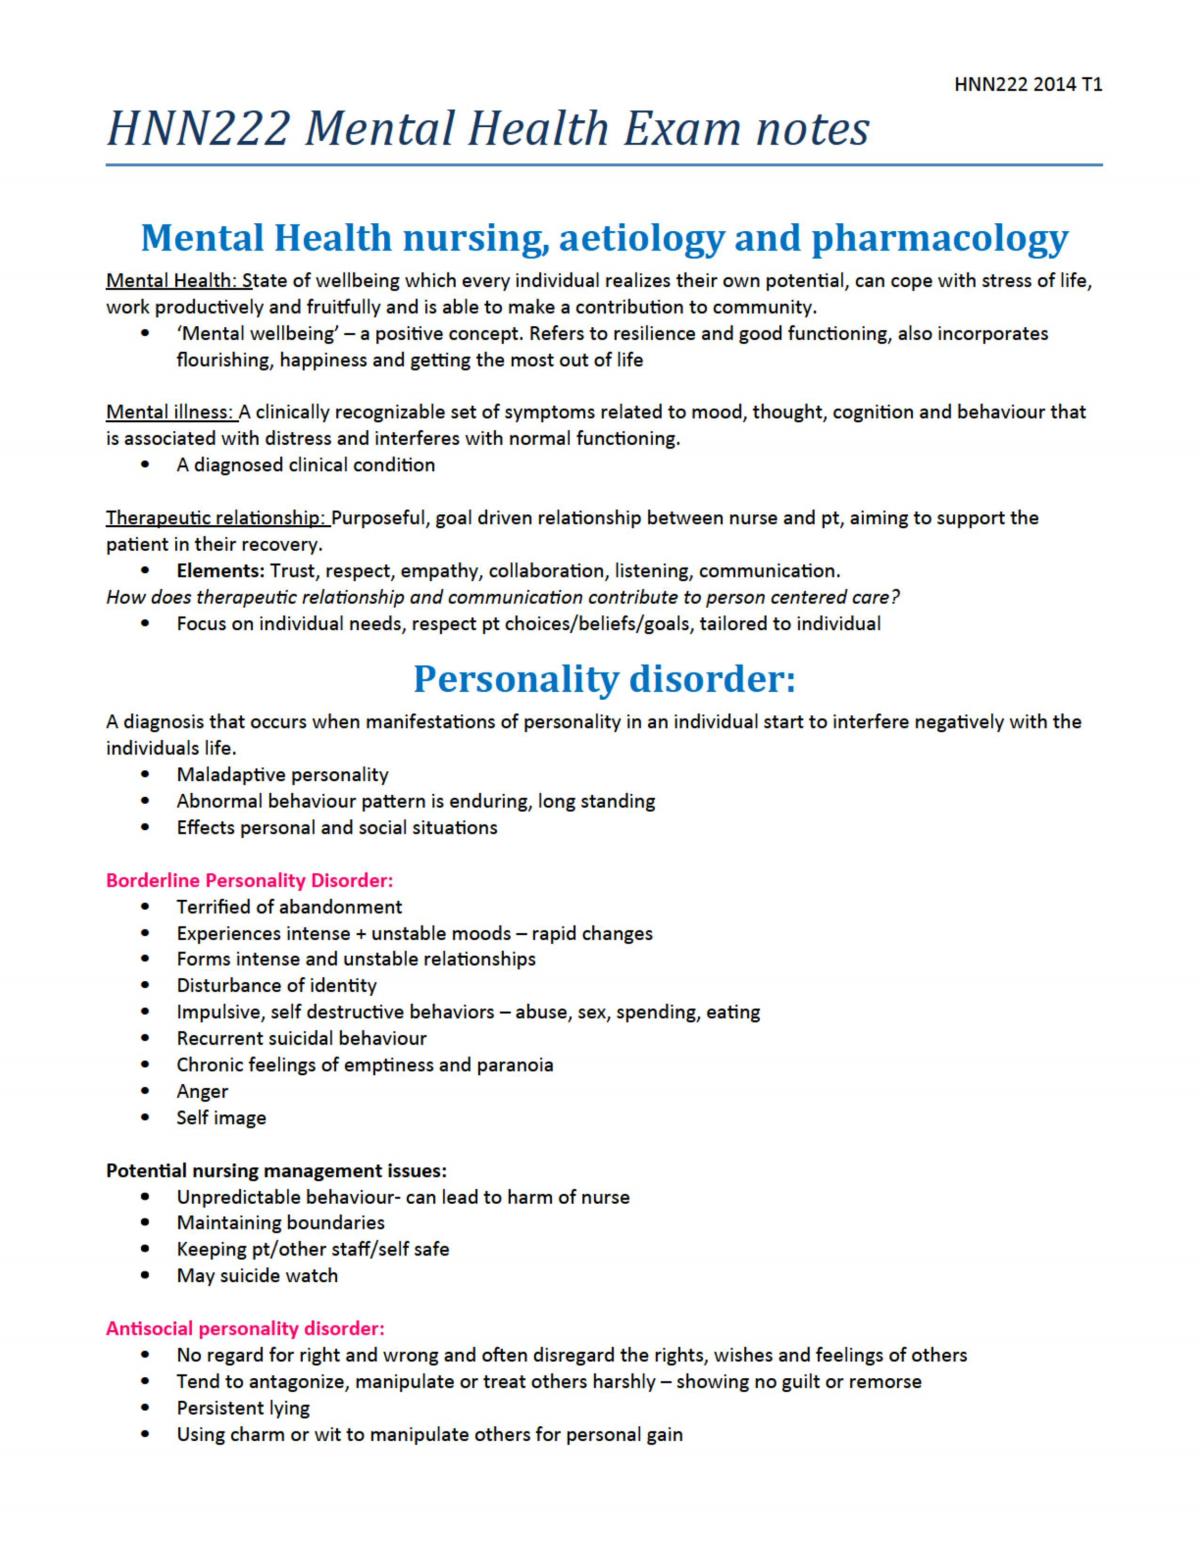 research topic on mental health nursing